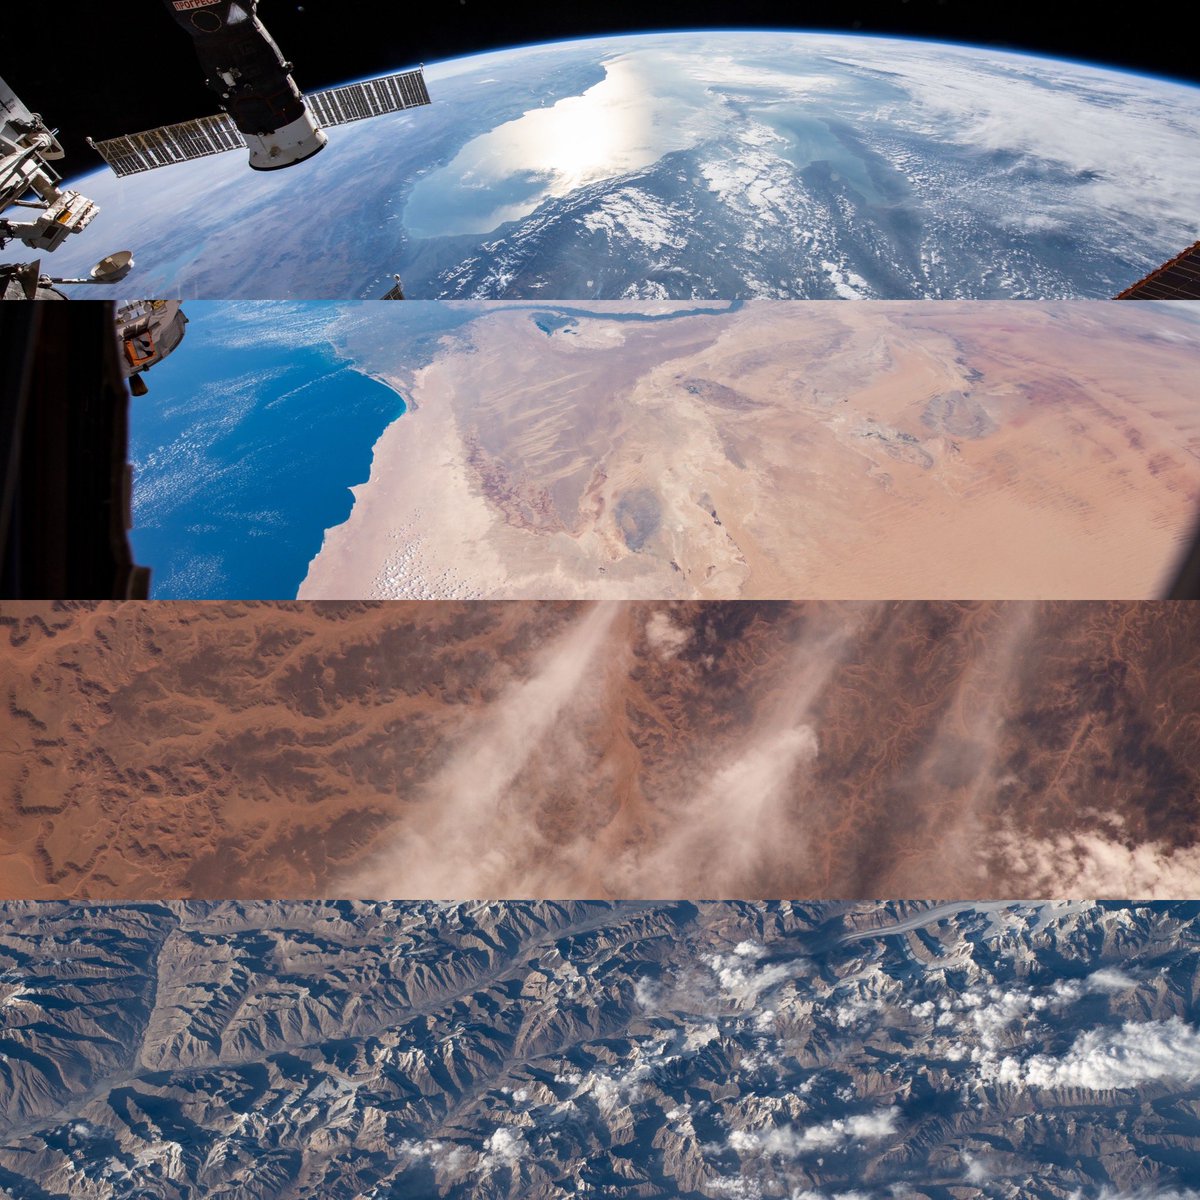 On #EarthDay, I would like to reshare some photos I took of our planet from the International Space Station in 2019. The sensation of seeing Earth from space for the first time is forever etched in my memory. It's an indescribable beauty, blessed with life and resources.